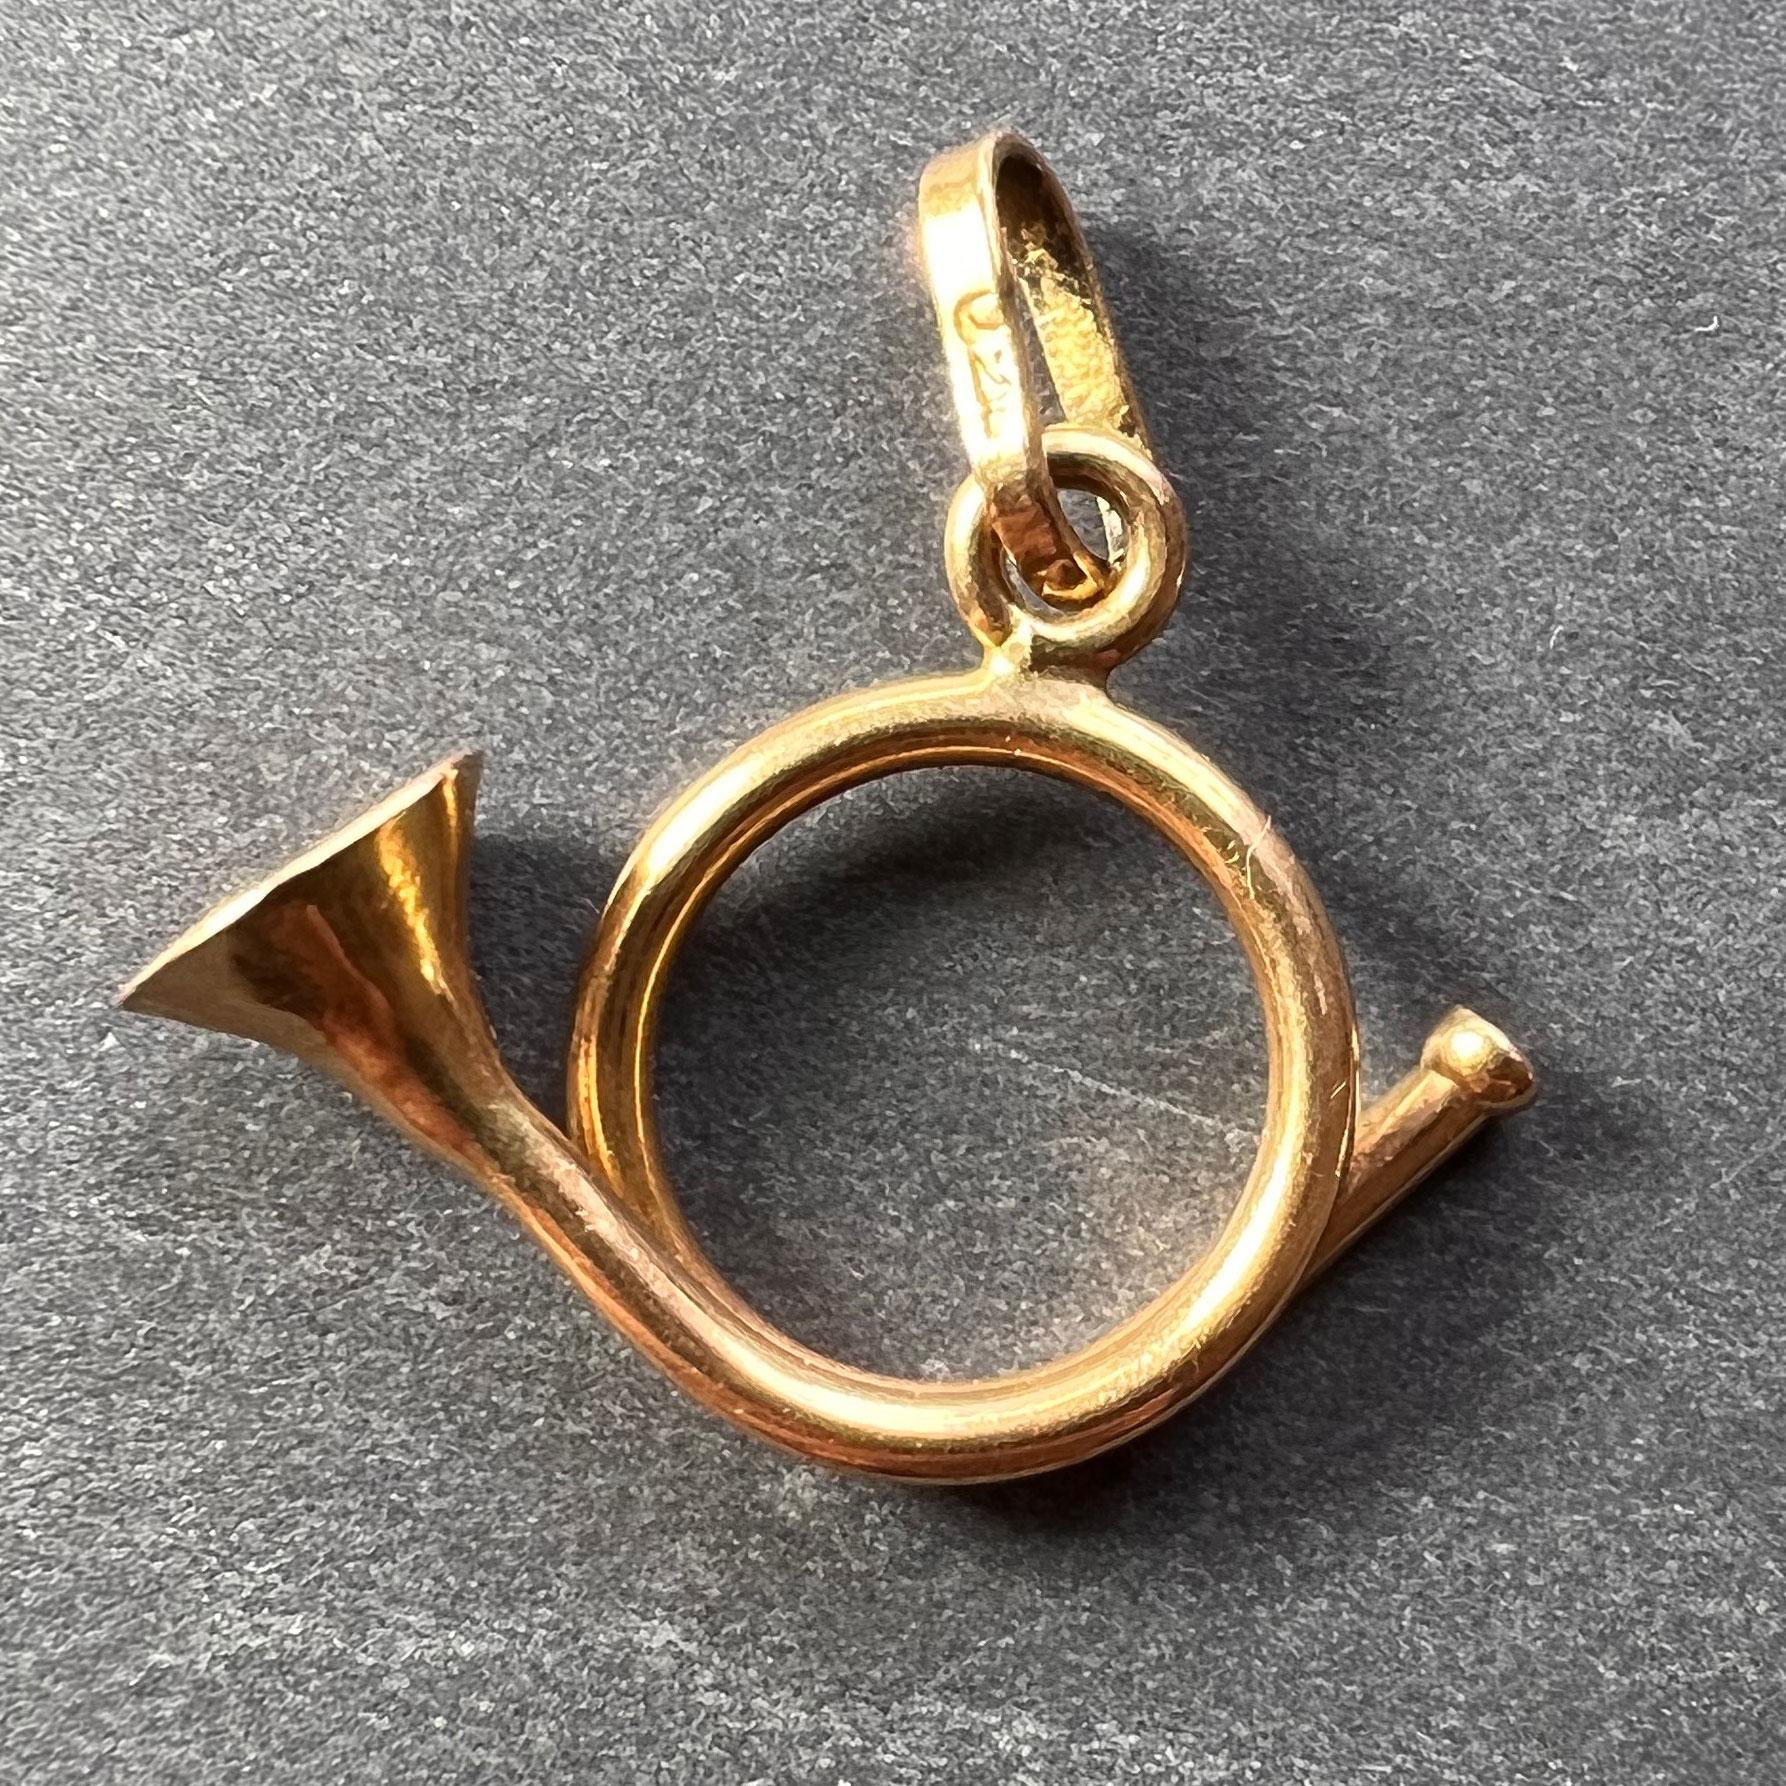 An 18 karat (18K) yellow gold charm pendant designed as a French horn. Stamped 750 for 18 karat gold to the bail.
 
Dimensions: 1.6 x 2 x 0.6 cm (not including jump ring)
Weight: 1.75 grams
